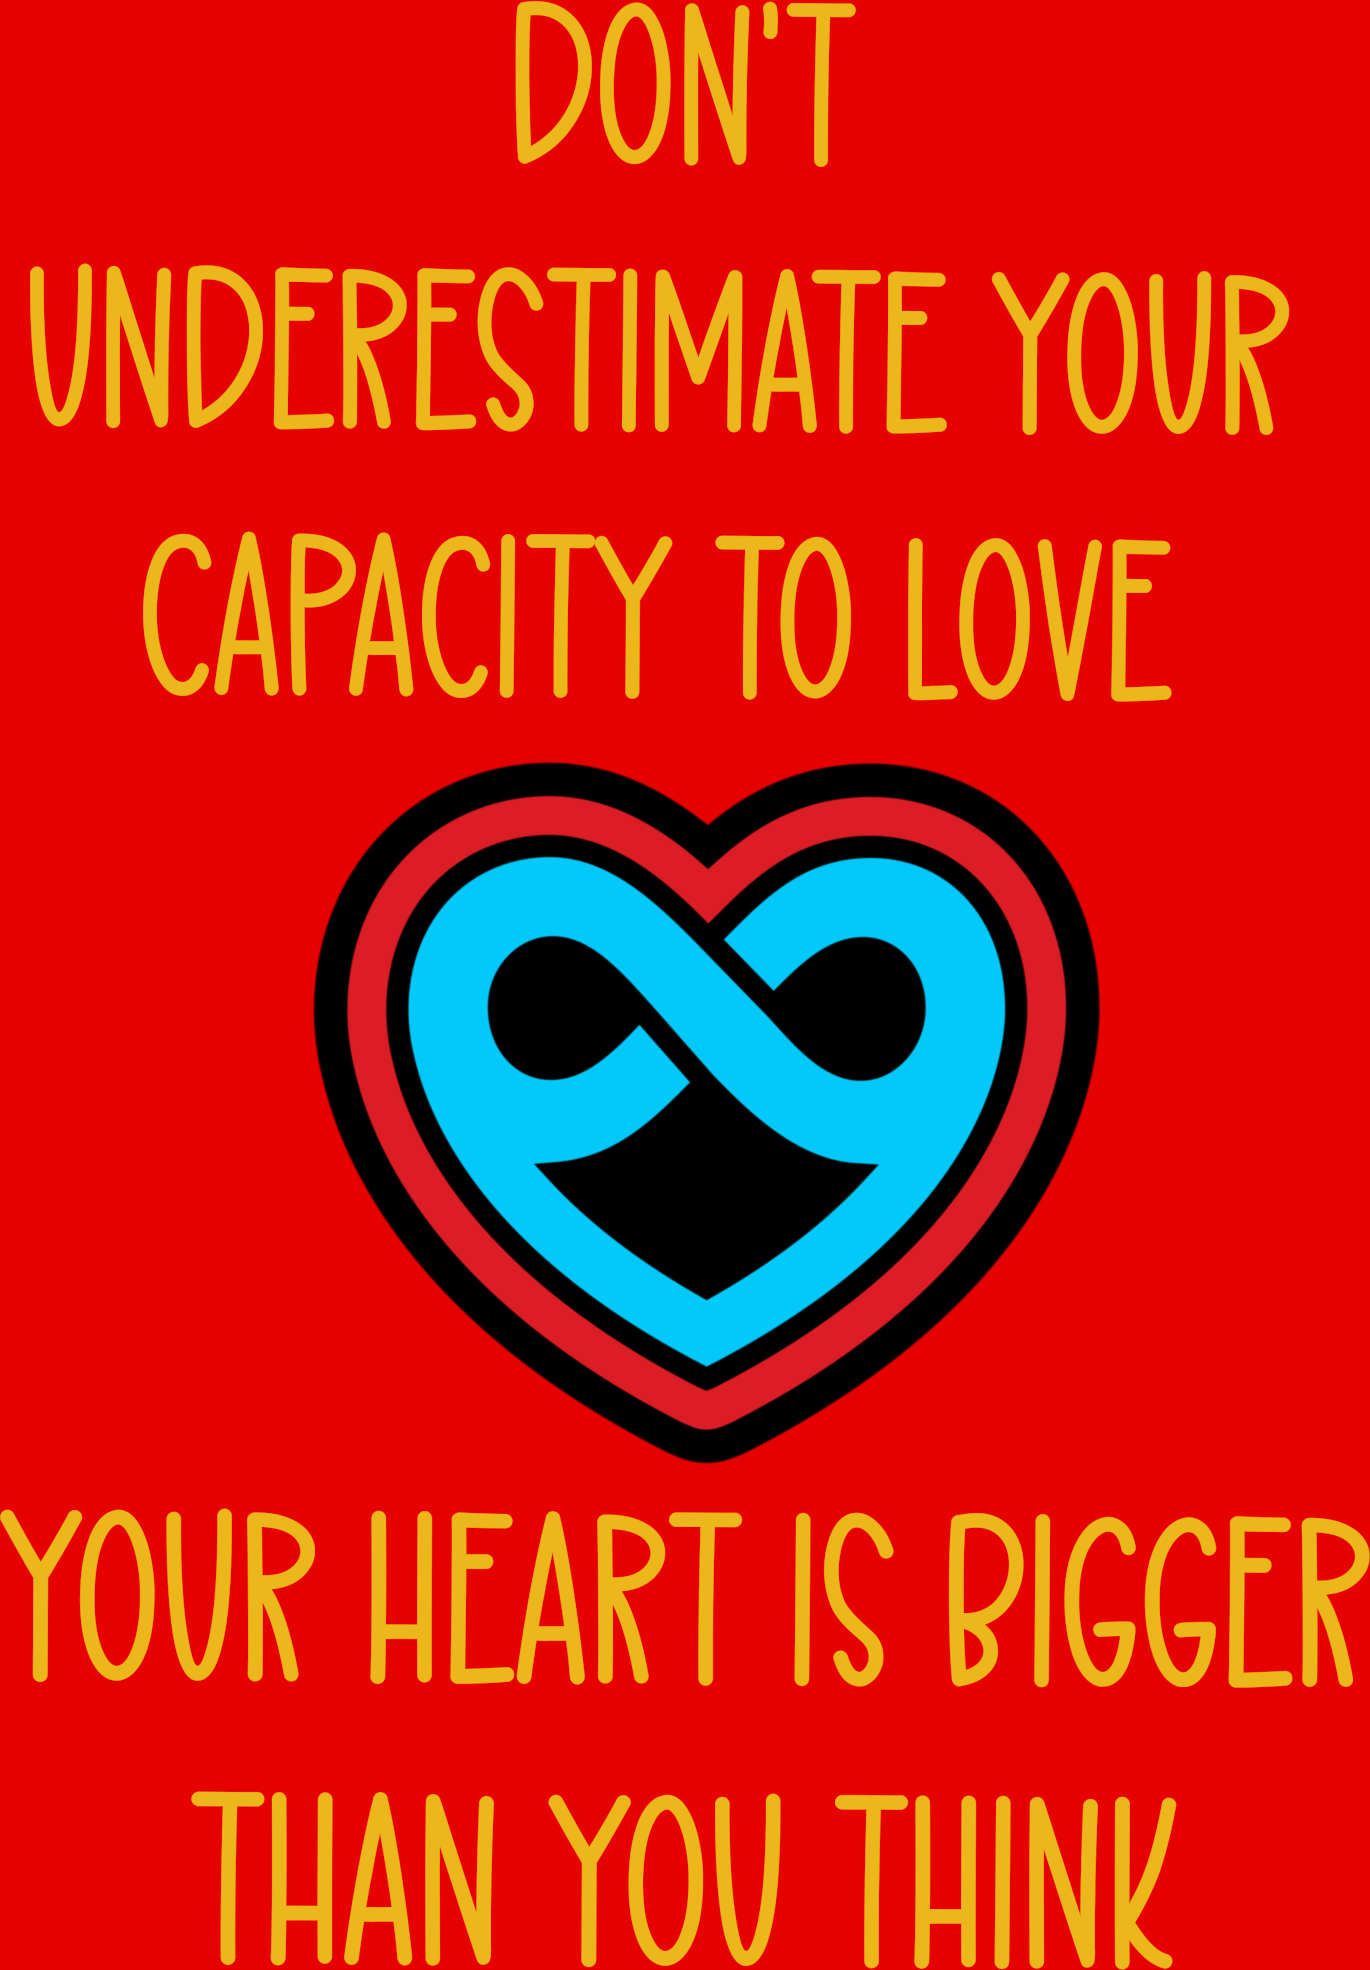 Never Underestimate Your Capacity to Love